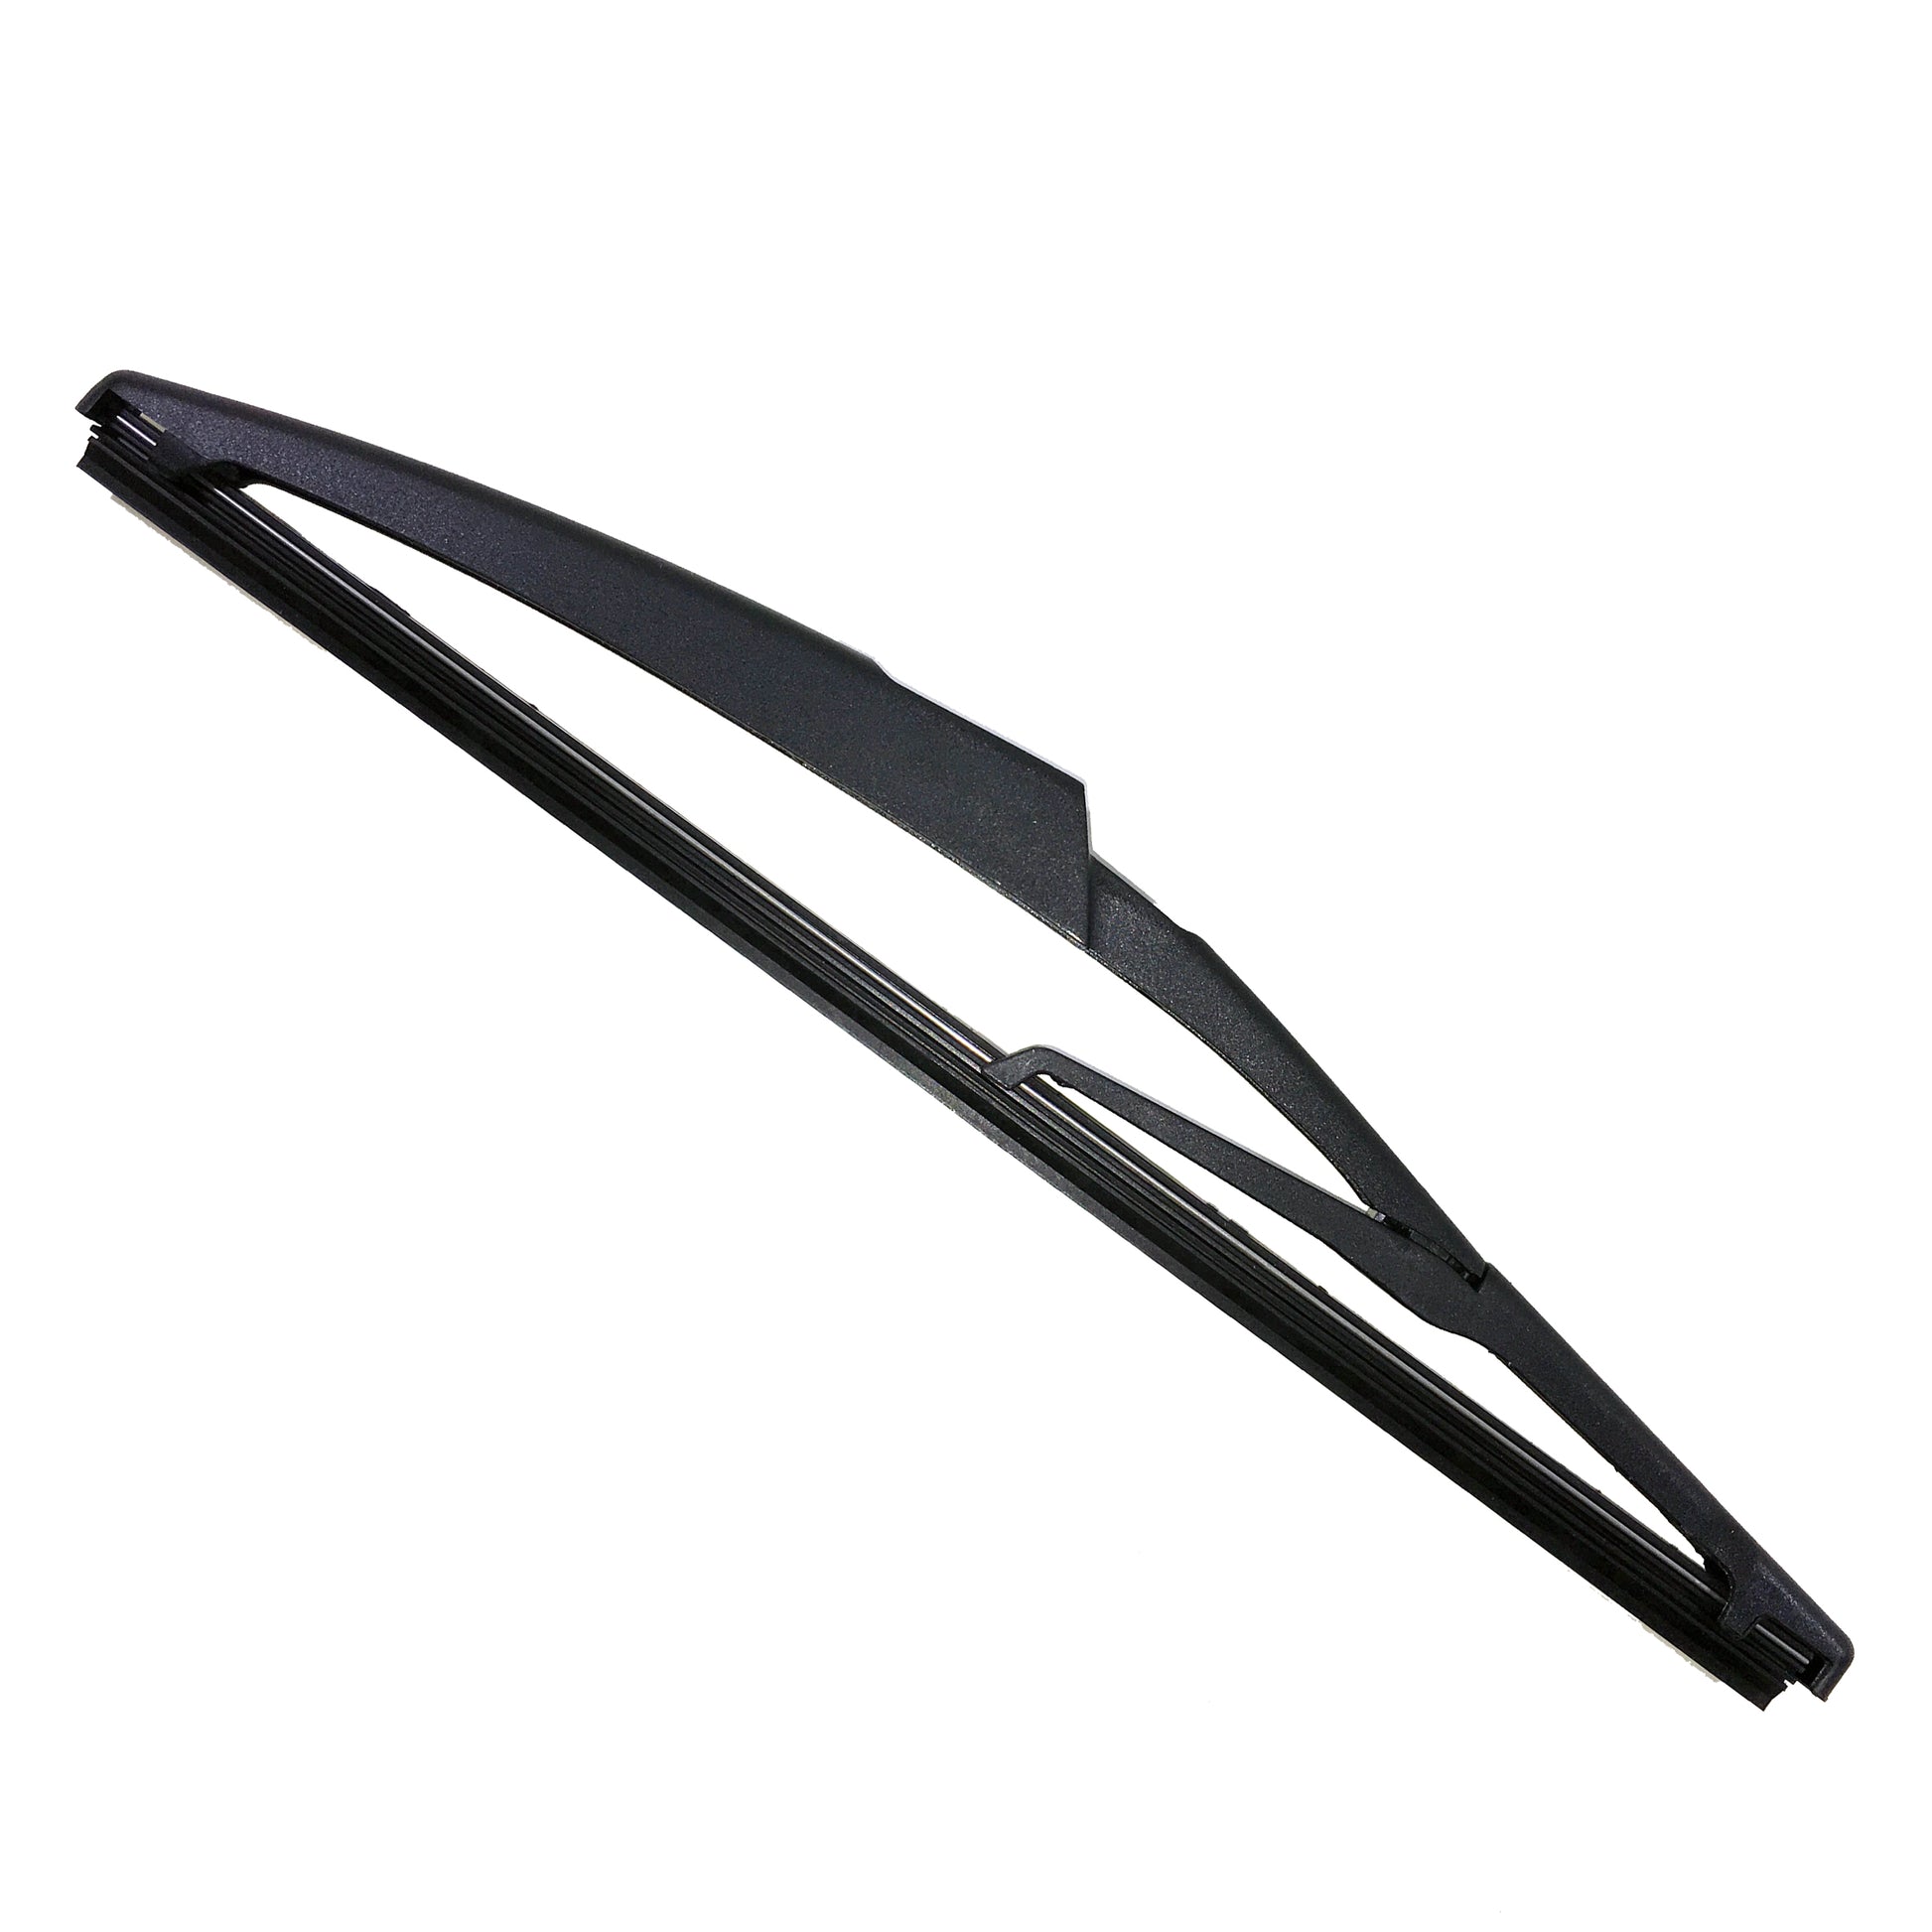 RENAULT MODUS / GRAND MODUS Hatchback Sep 2004 to May 2005Rear Wiper Blade 